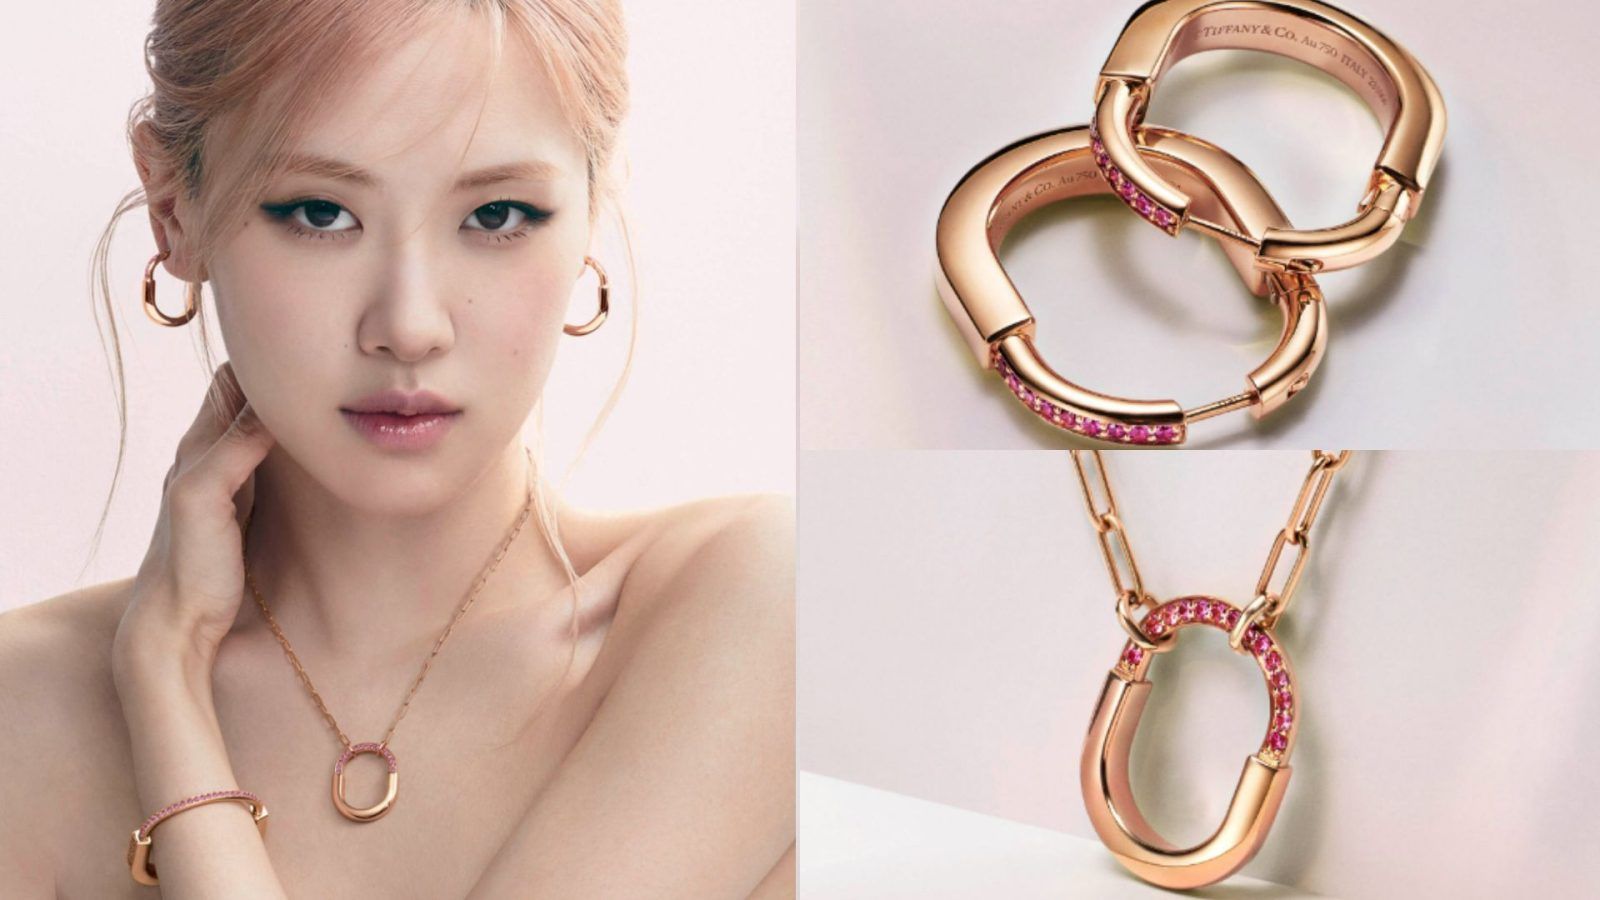 Shopping Made Fun Tiffany & Co. launches BLACKPINK's Rosé-inspired